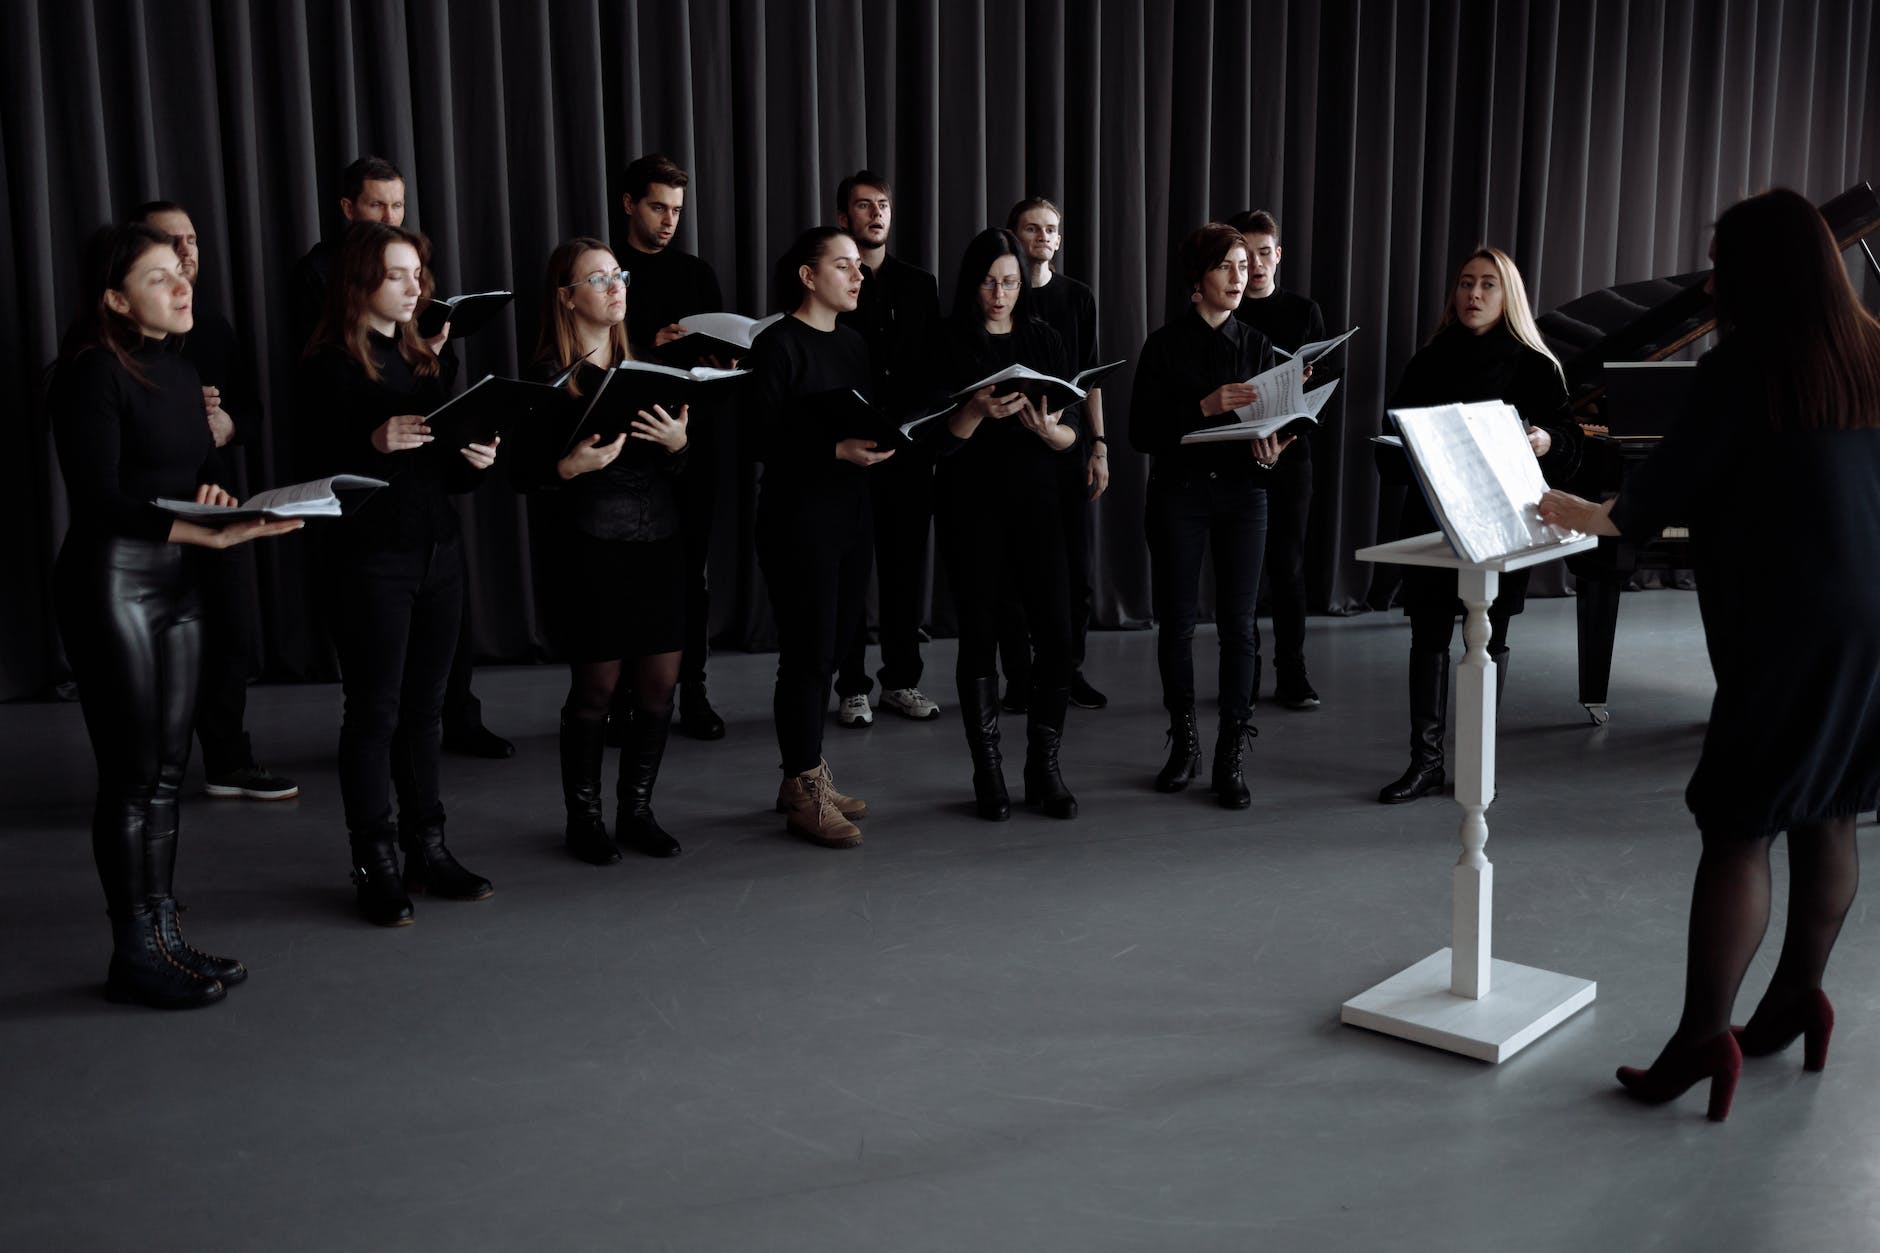 a choir wearing black clothes singing together